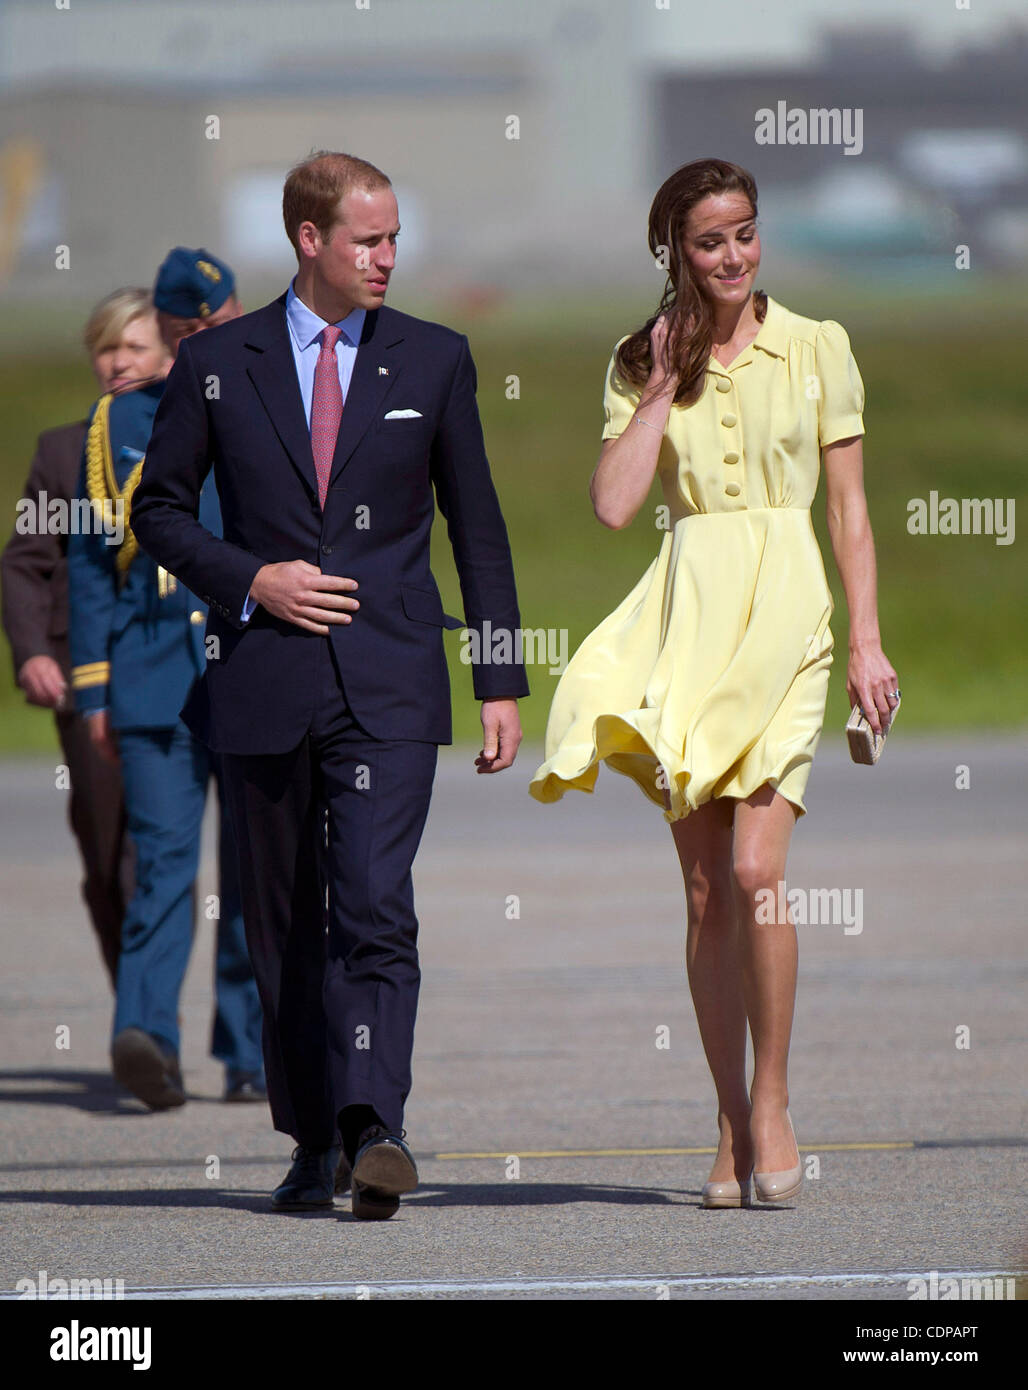 July 7, 2011 - Calgary, Alberta, Canada - Prince William and Catherine Middleton, Duchess of Cambridge, are greeted with white cowboy hats as they arrive in Calgary. Calgary is the last Canadian stop of the British Royal Tour. Photo by Jimmy Jeong / Rogue Collective Stock Photo